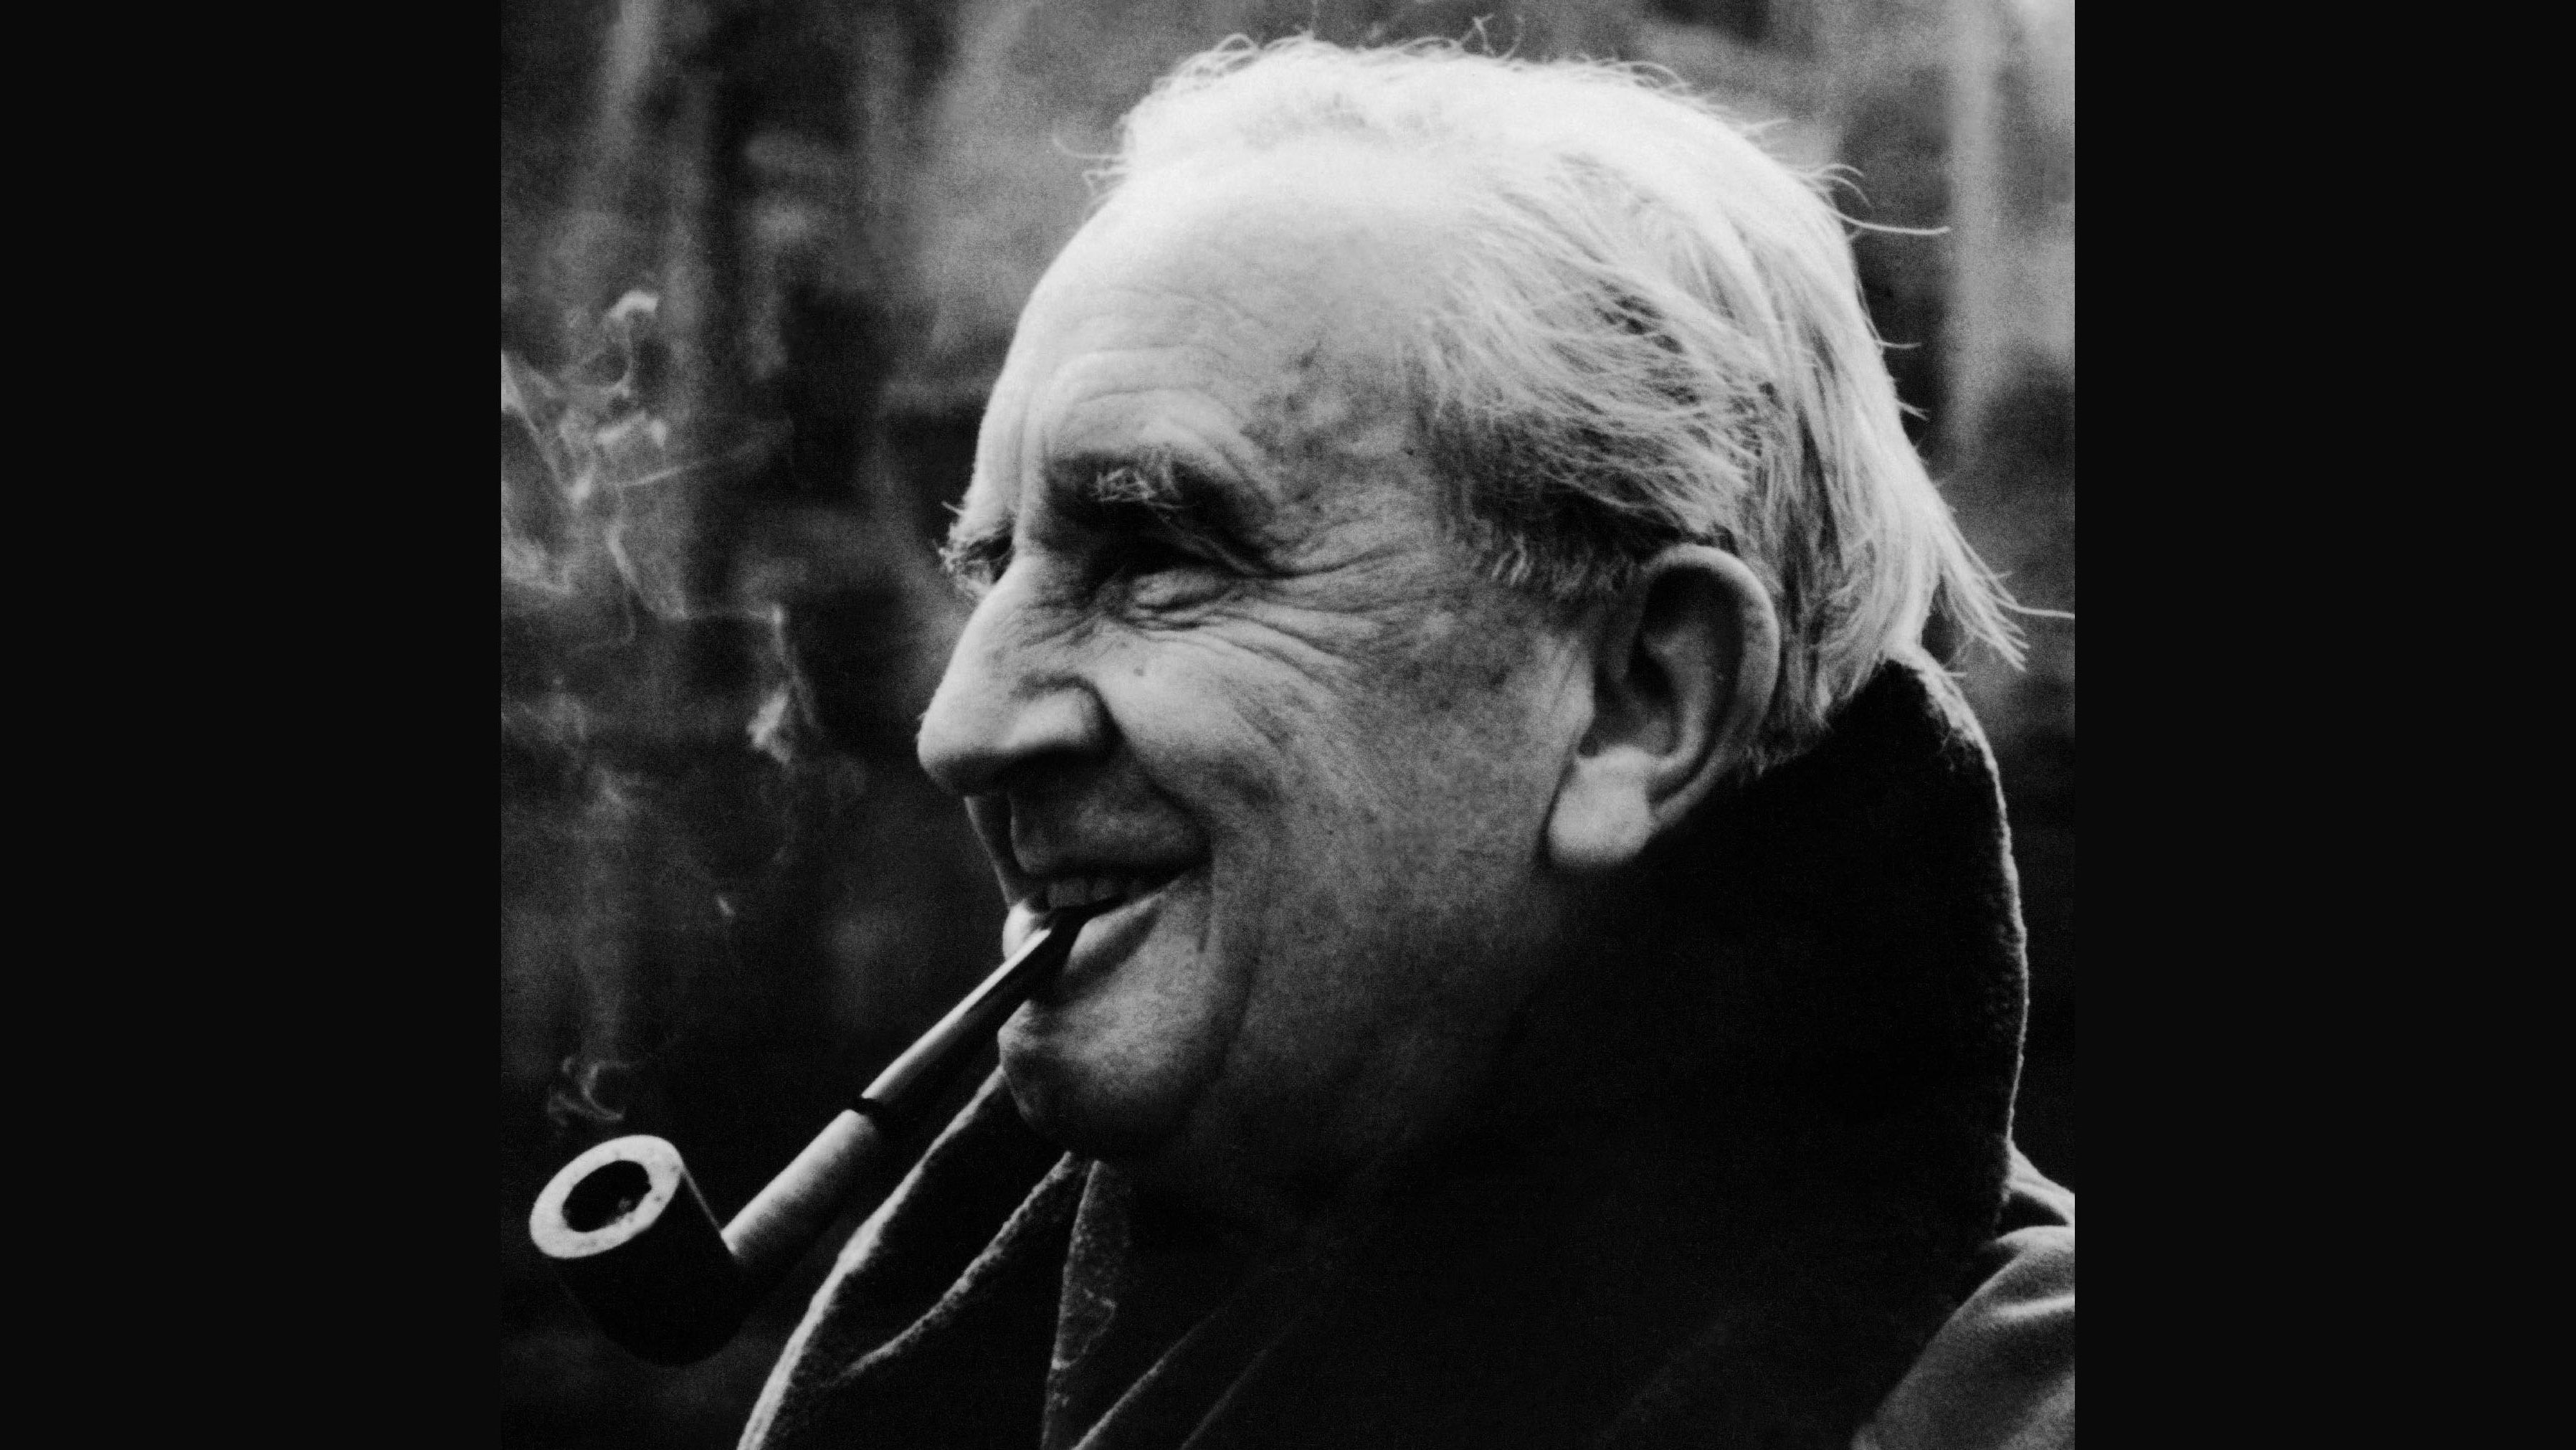 J.R.R. Tolkien based some of "The Lord of the Rings" on his World War I experiences.